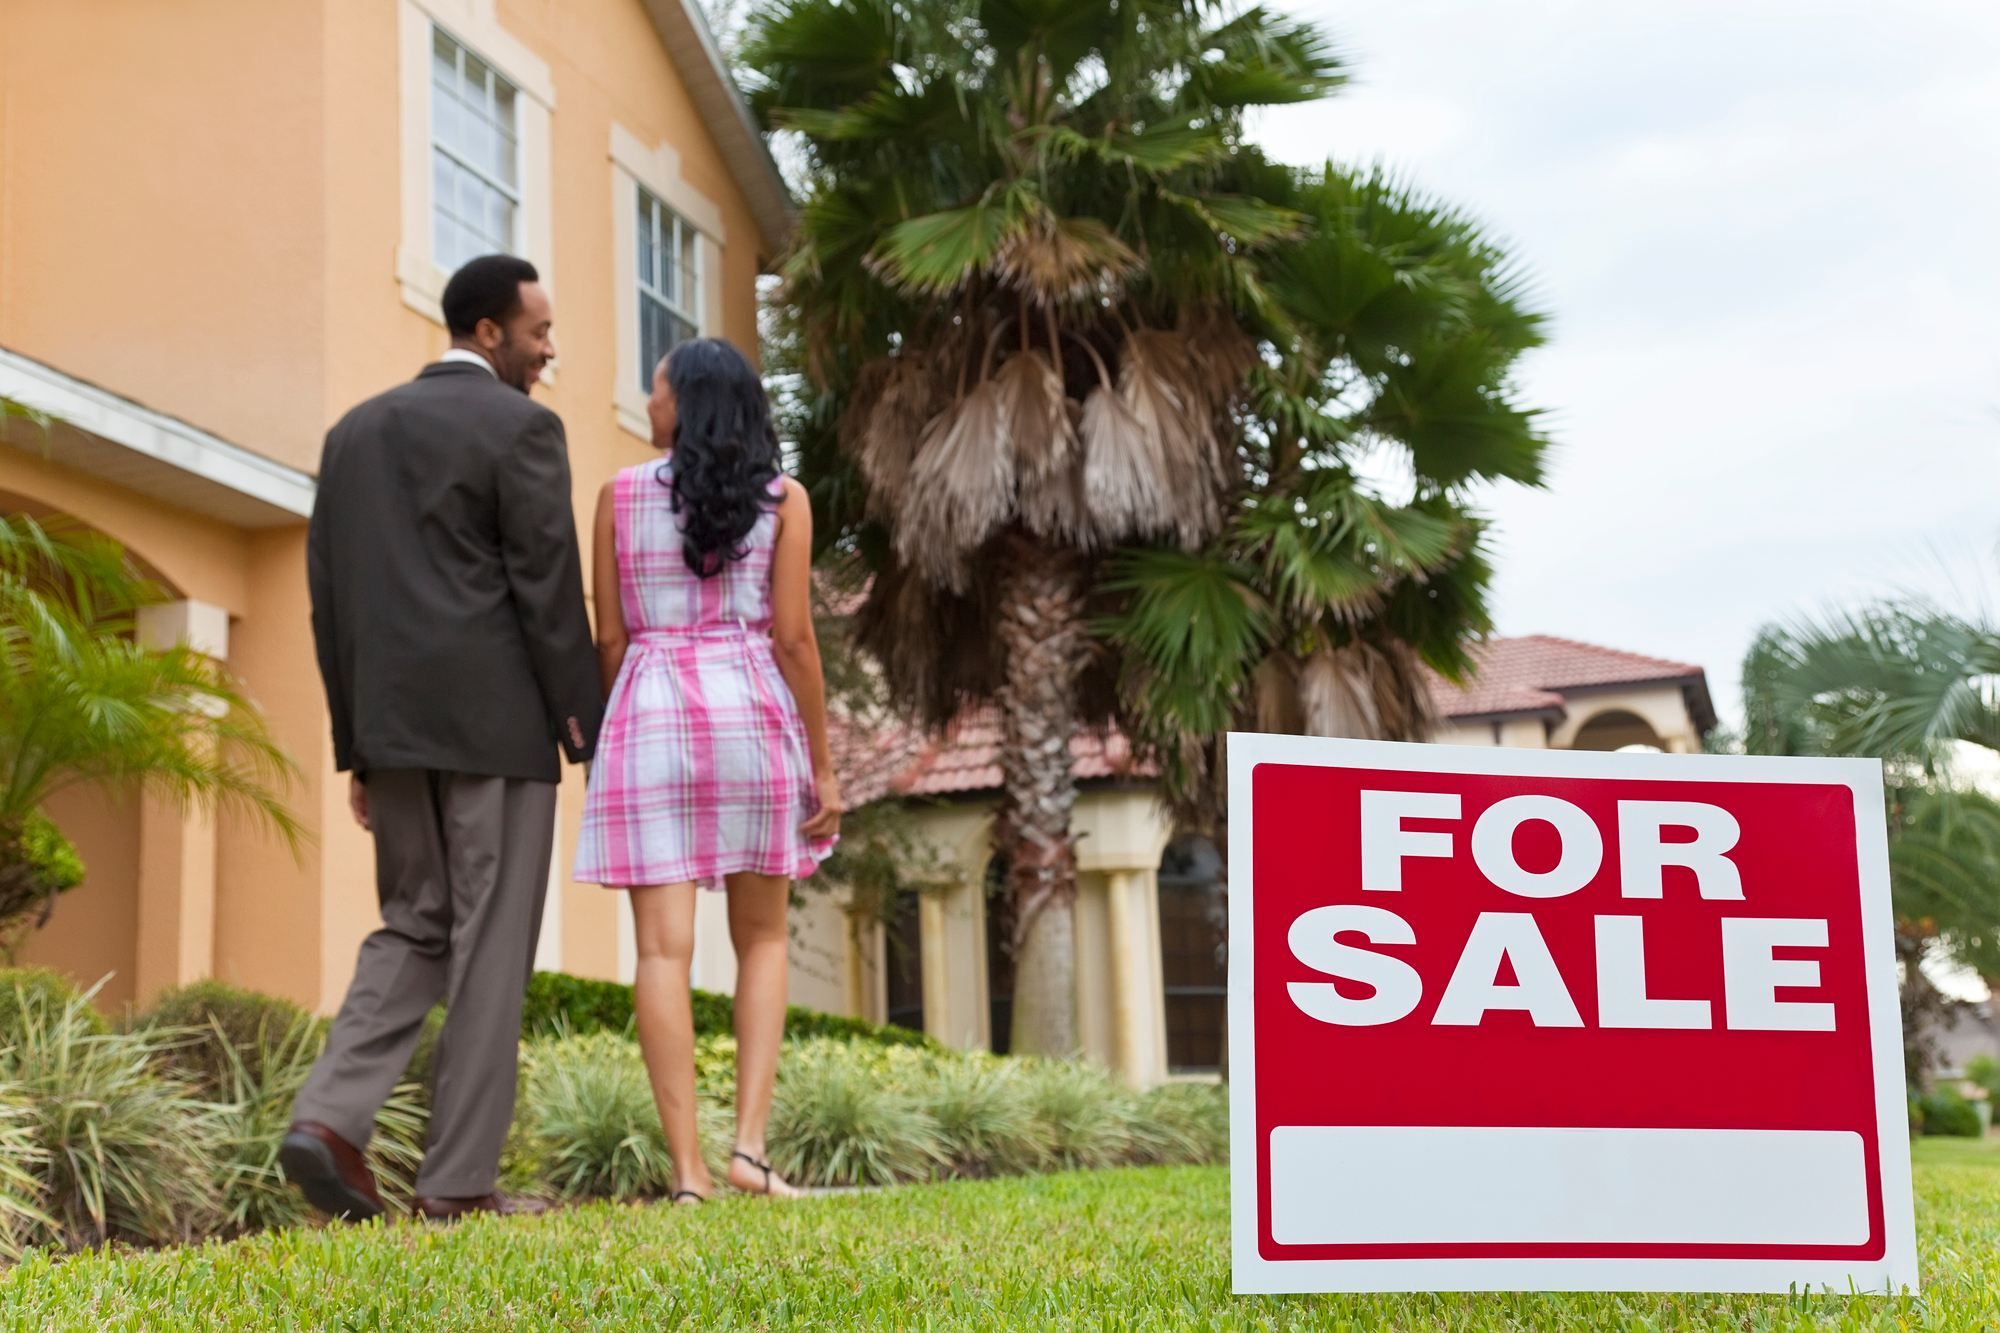 Real estate agents say Zillow hides listings from consumers.